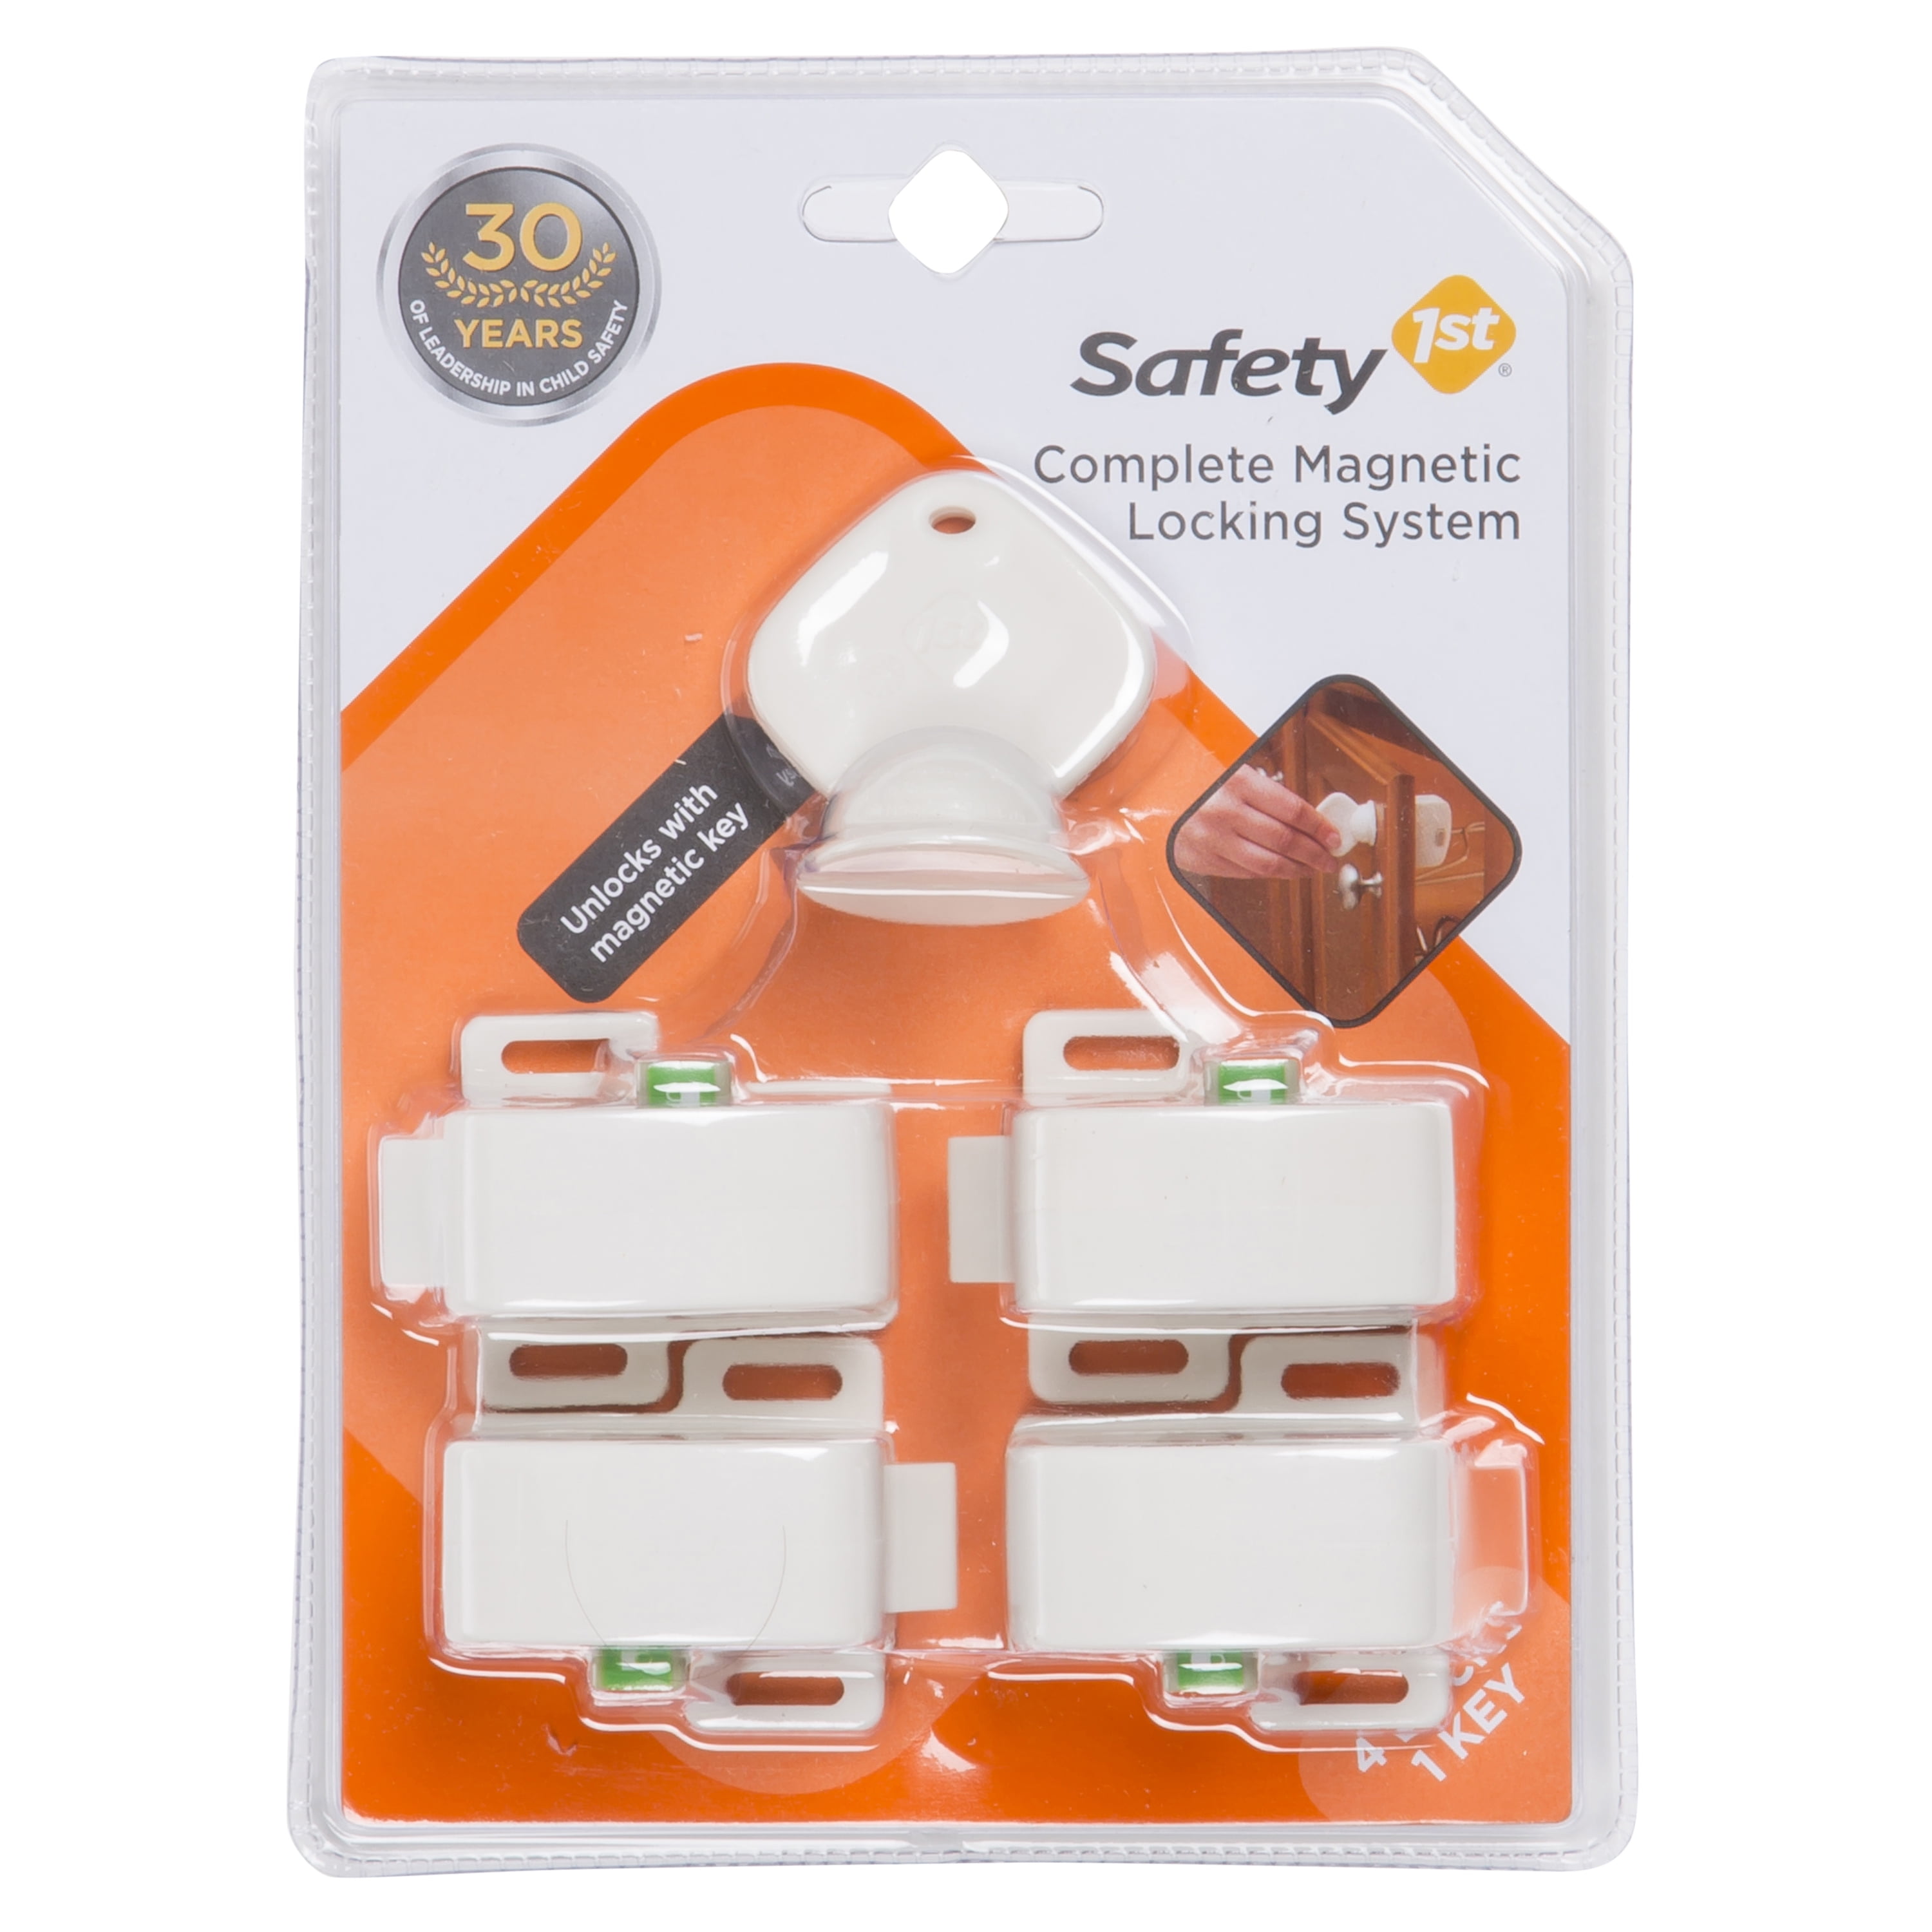 Safety 1st Magnetic Complete Locking System 27 Pieces Includes 3 Keys & 24 Locks 